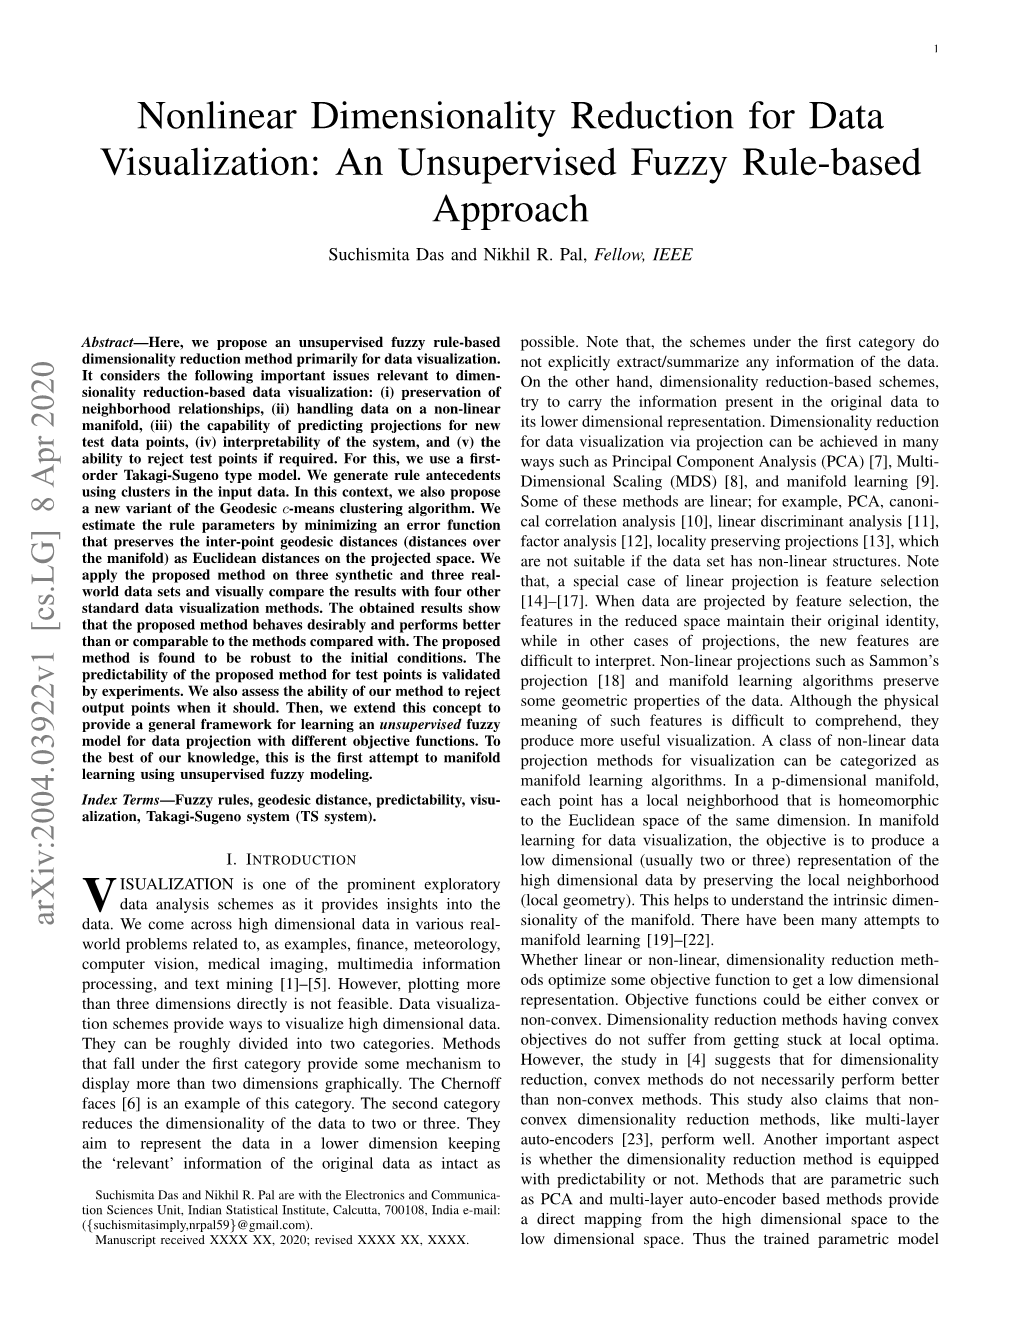 Nonlinear Dimensionality Reduction for Data Visualization: an Unsupervised Fuzzy Rule-Based Approach Suchismita Das and Nikhil R